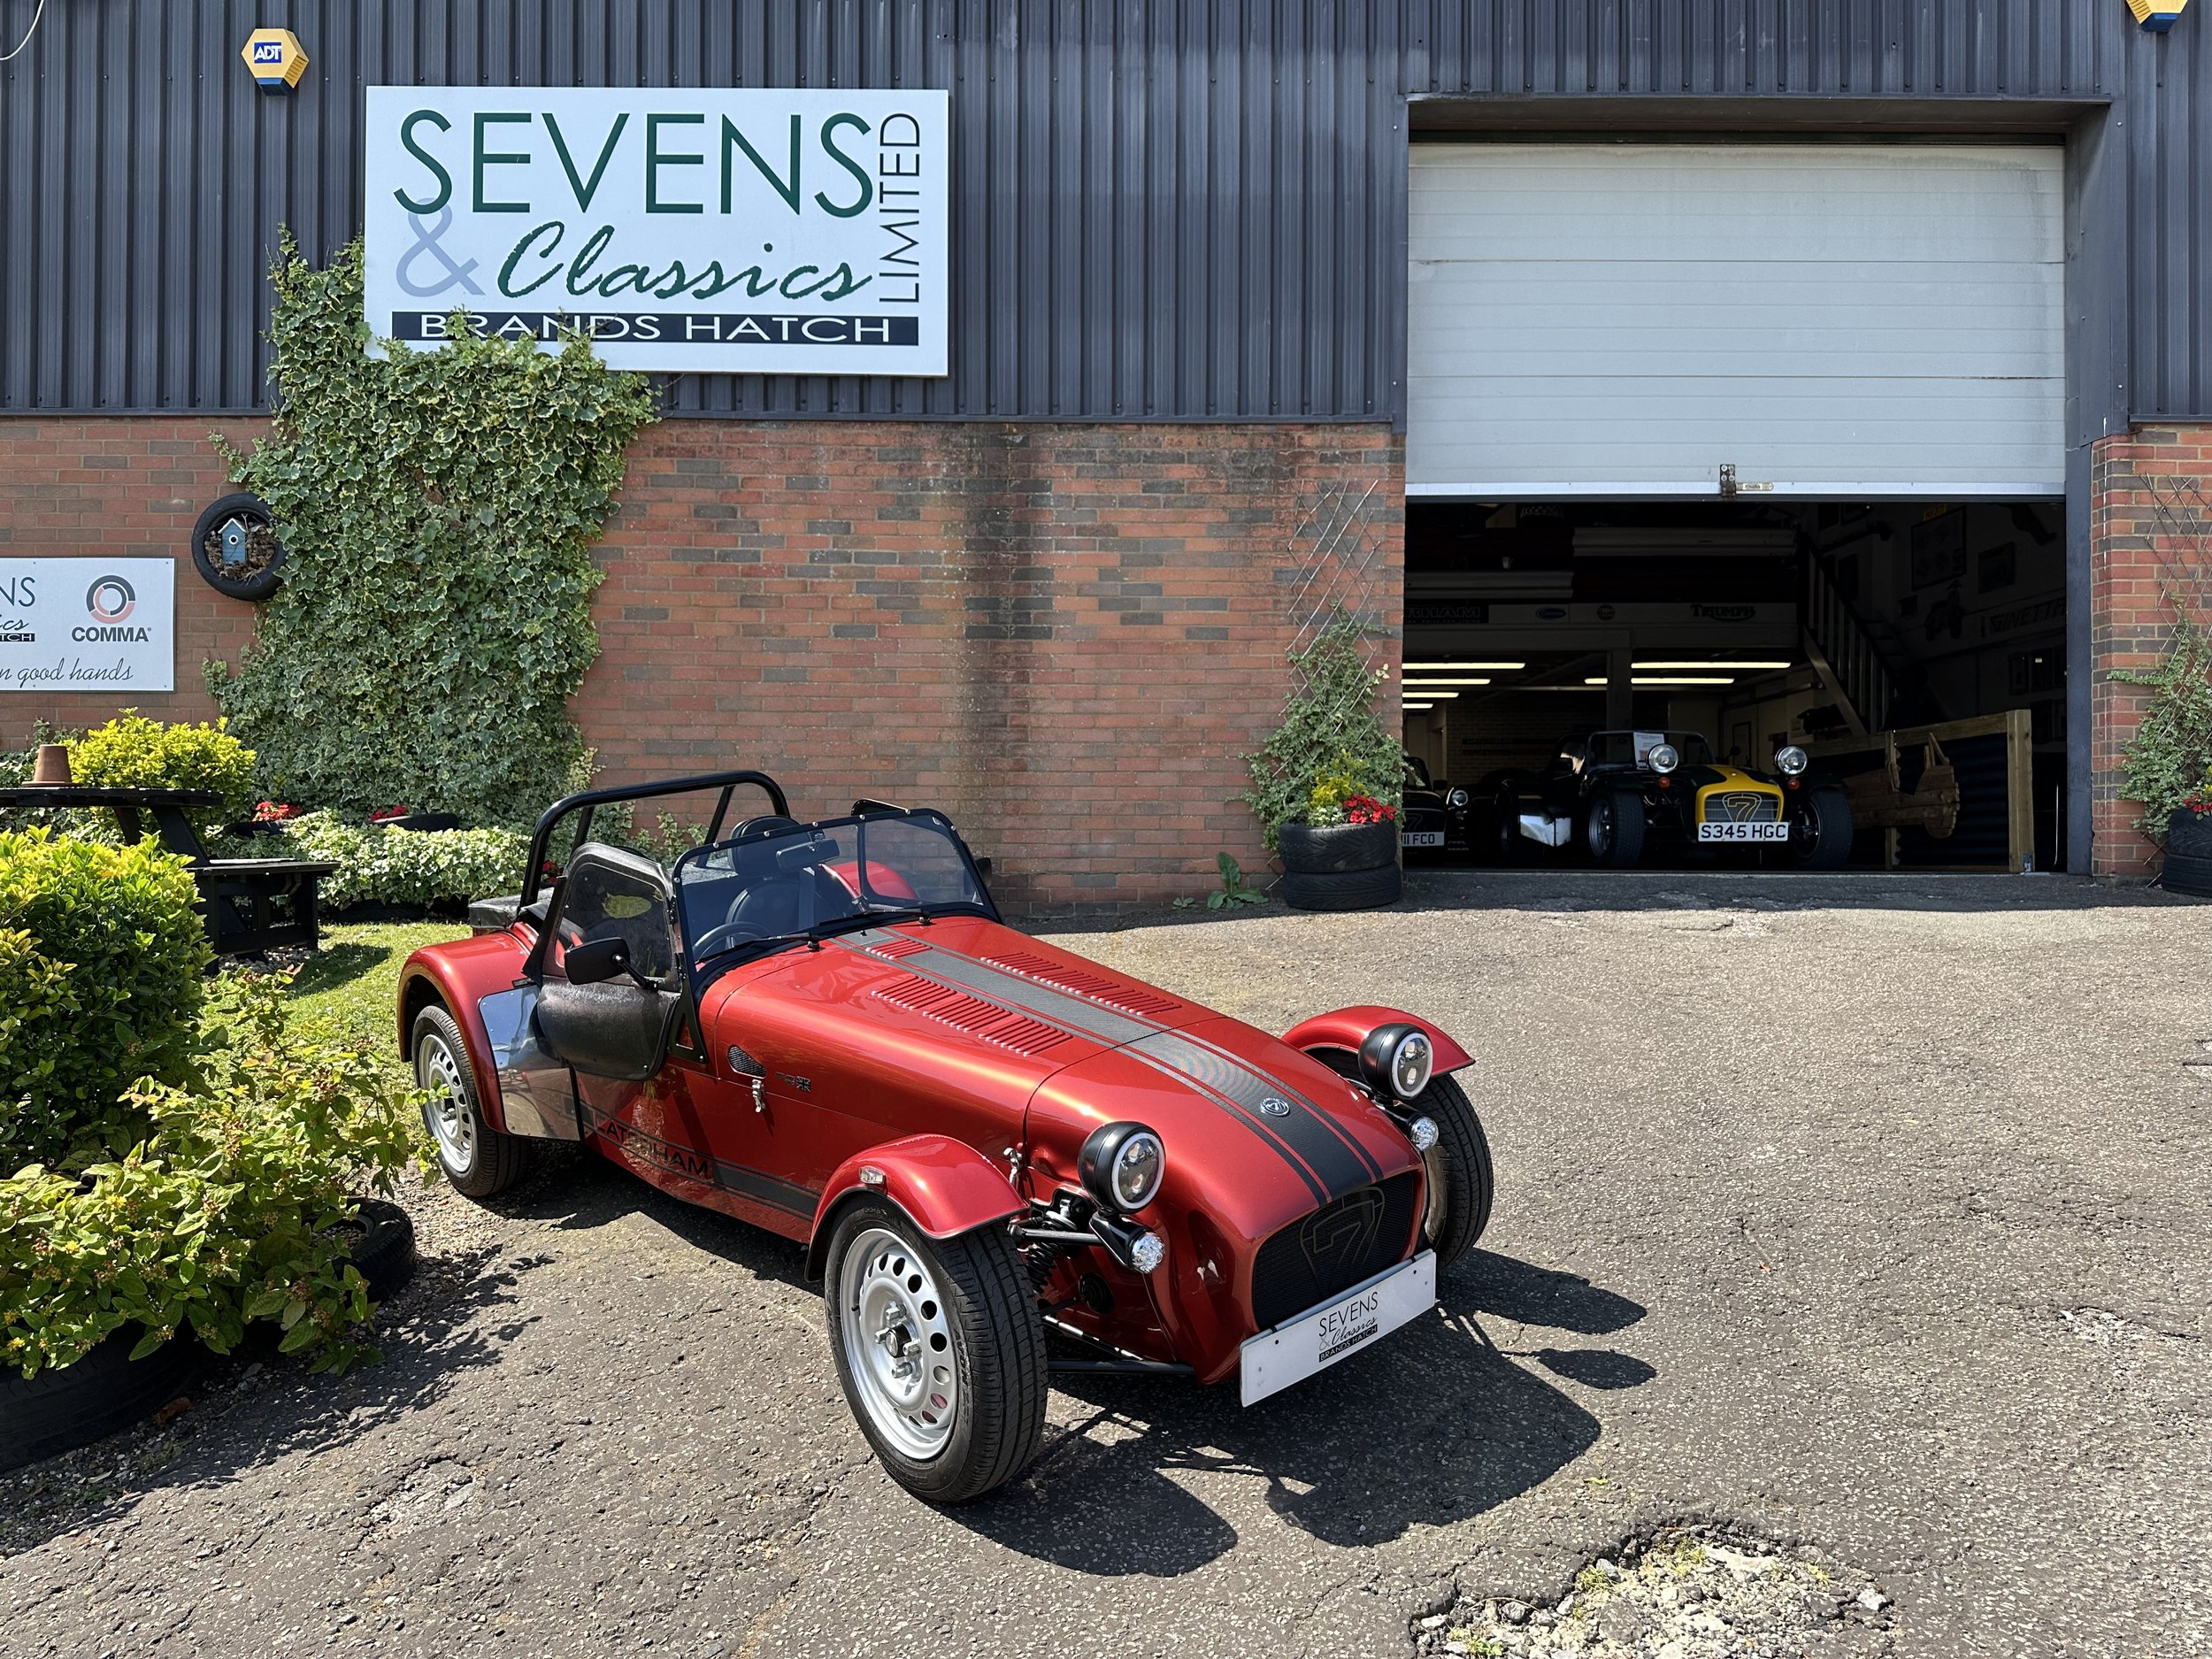 Showroom, Caterham Seven and Classics Cars For Sale